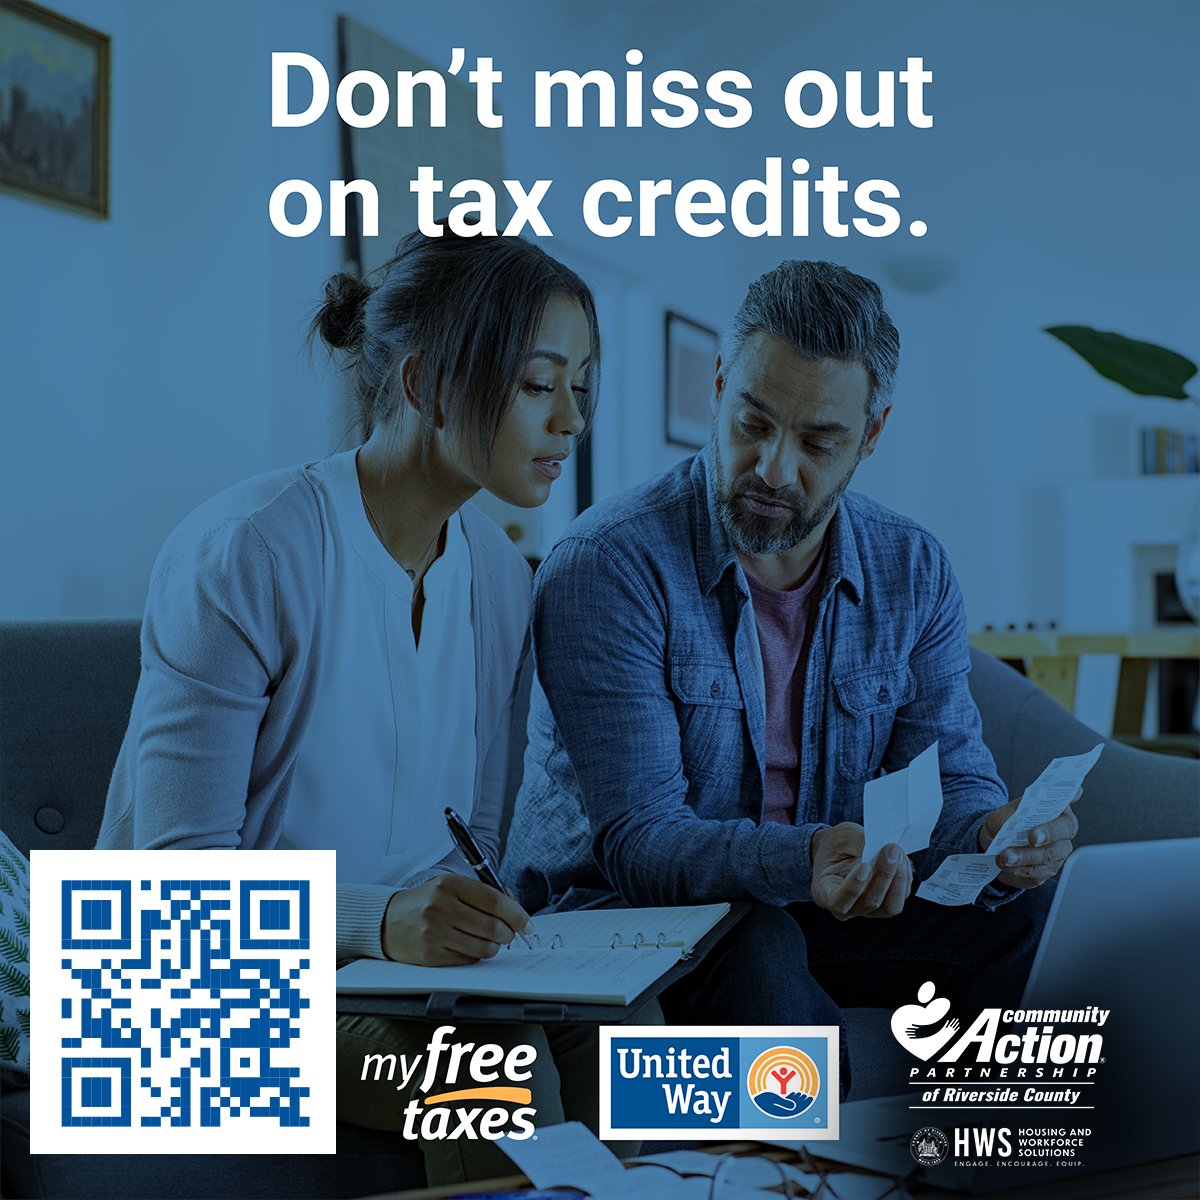 Don’t miss out on tax credits, there is still time to file your taxes for FREE on hubs.ly/Q02sLT3M0.
#CommunityAction #CAPRiverside #RivCoNOW #FreeTaxFiling #MyFreeTaxes